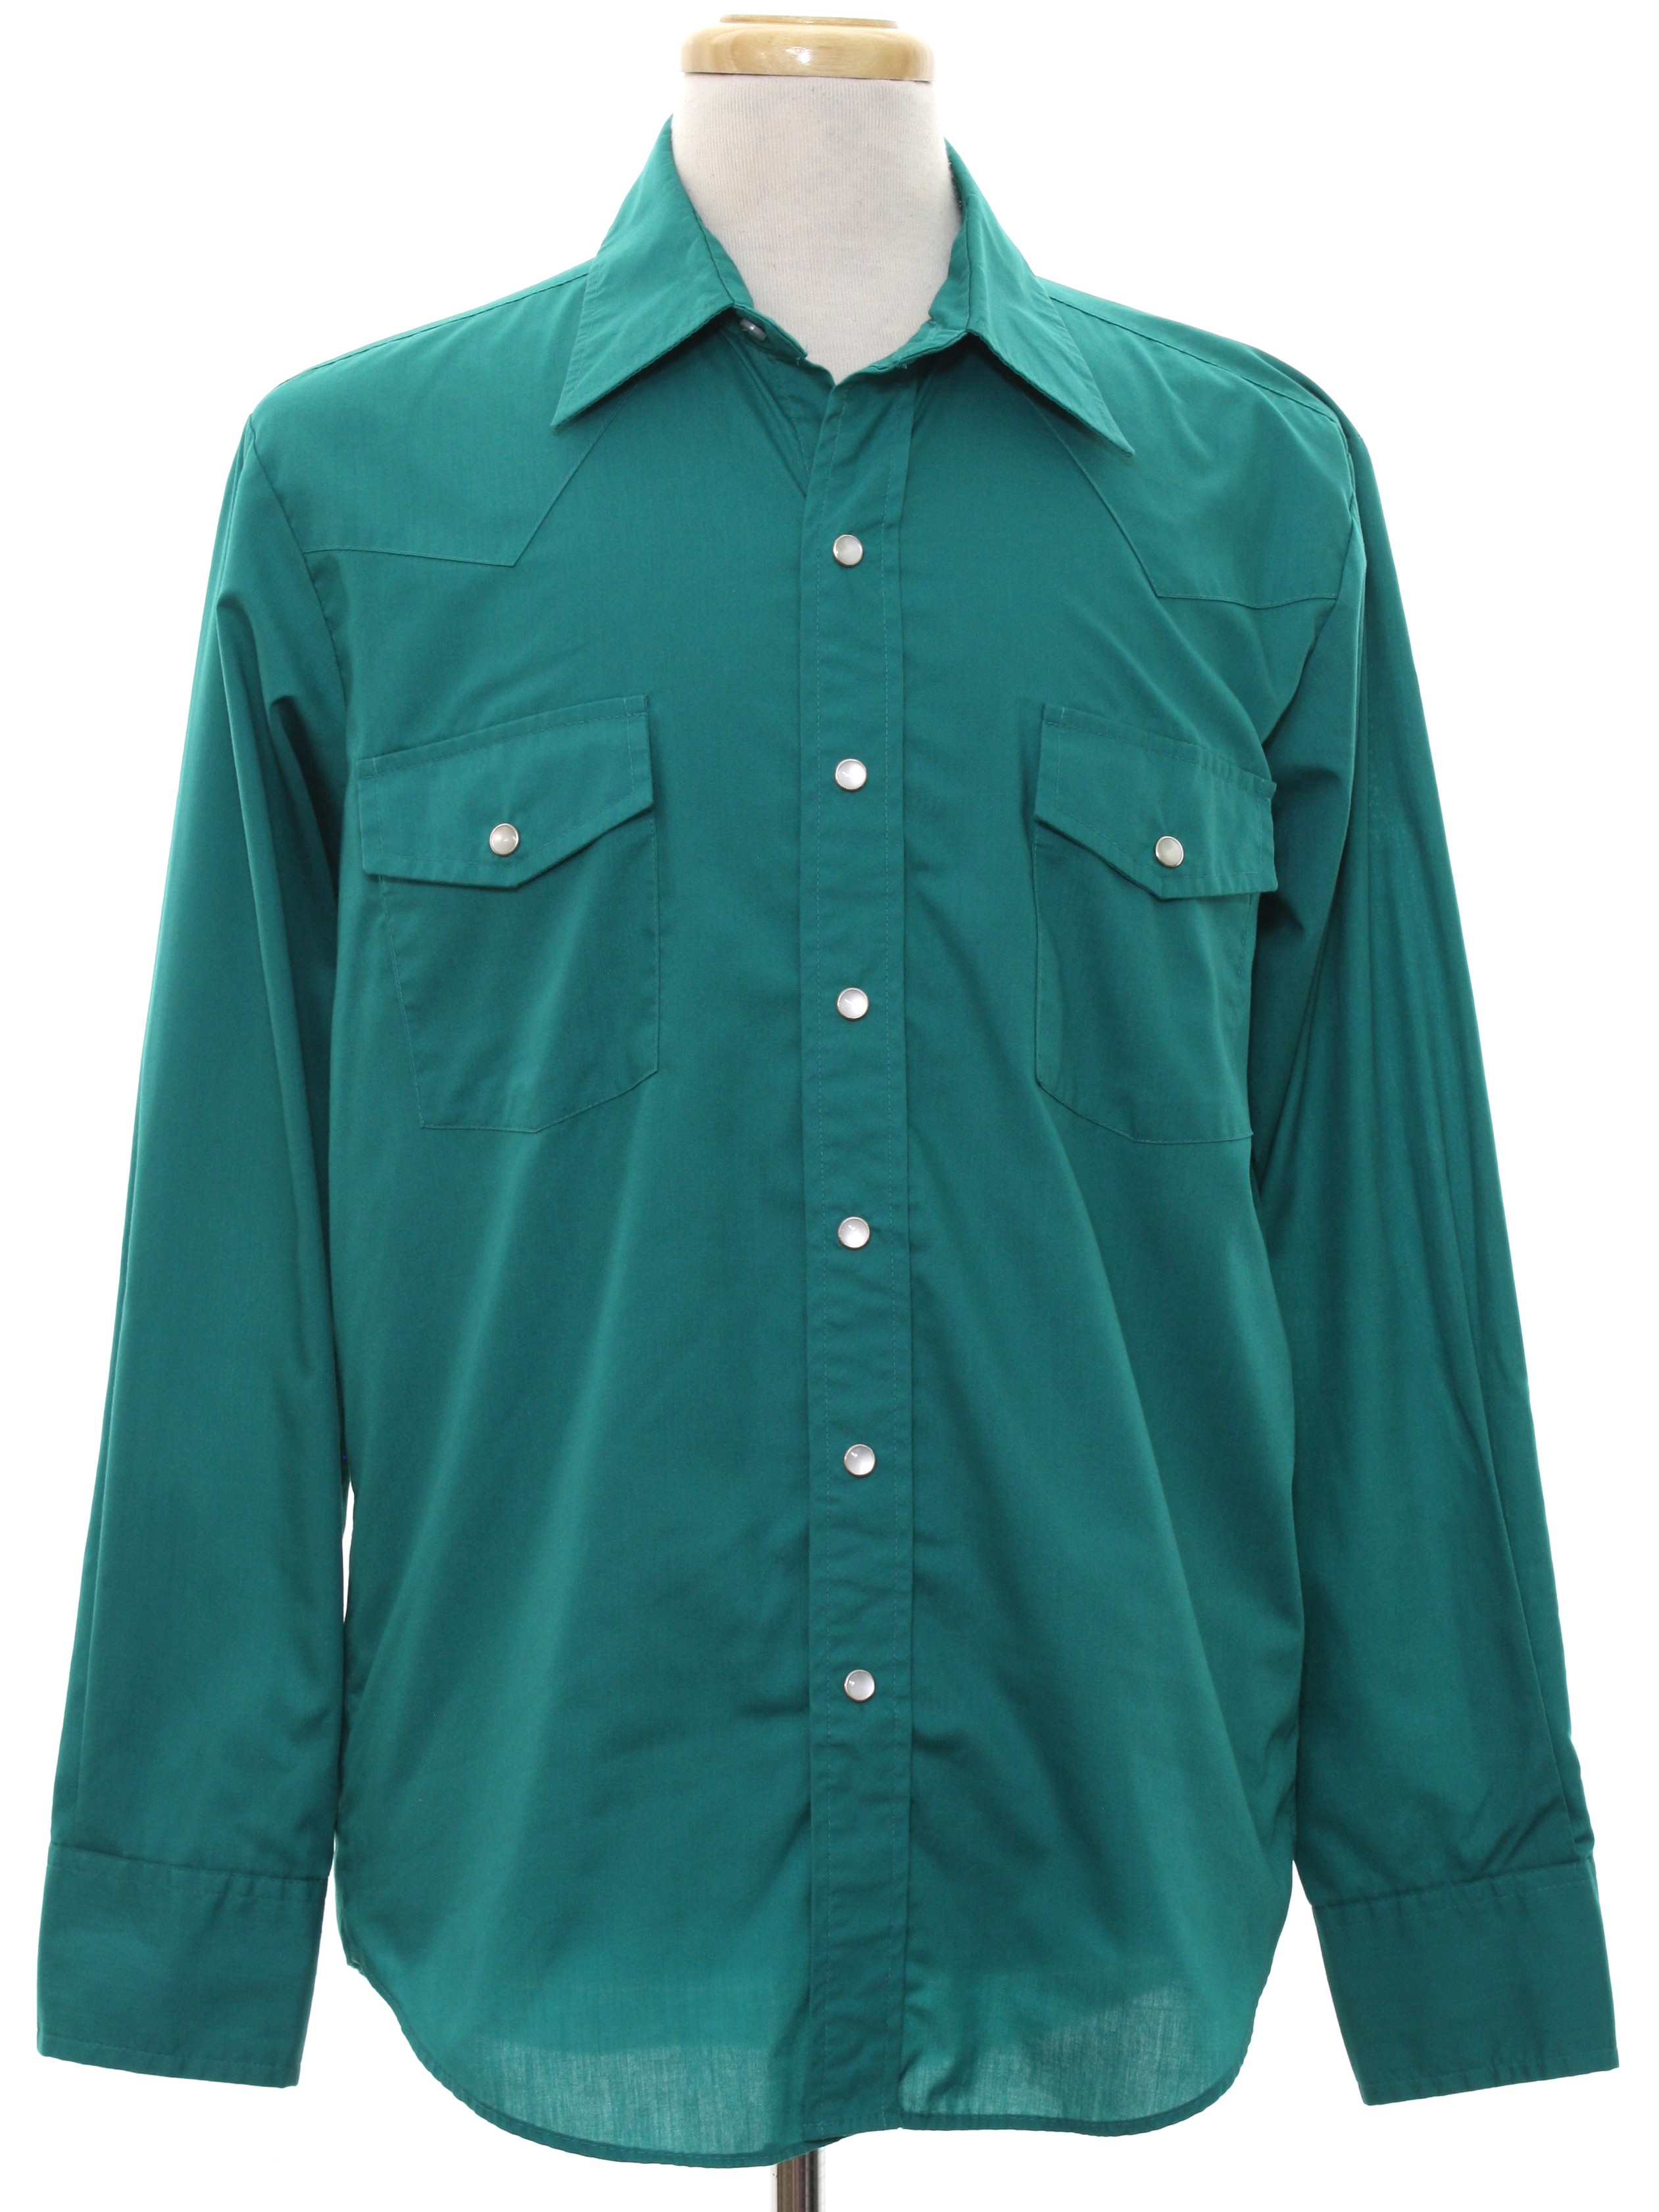 Vintage Malco Modes 1980s Western Shirt: 80s -Malco Modes- Mens teal ...